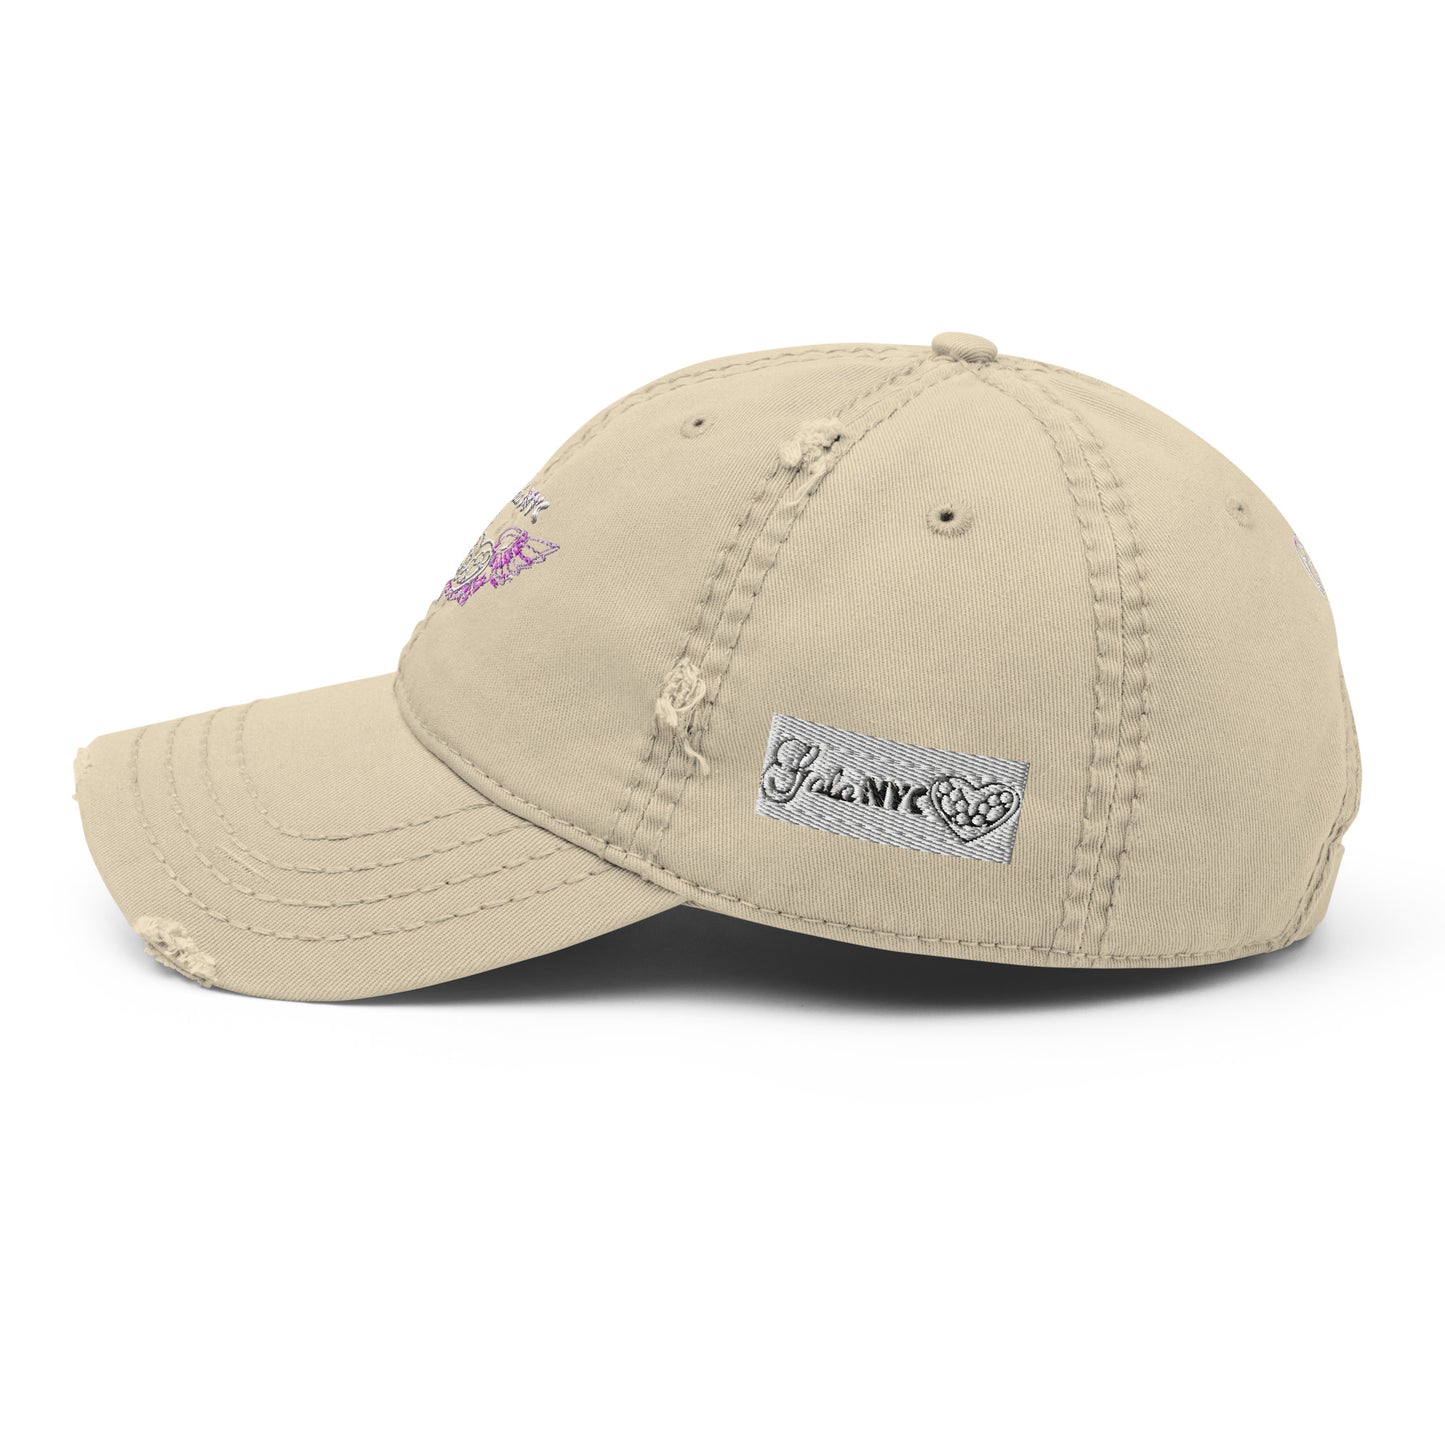 Fighter'sHEART Dad Hat